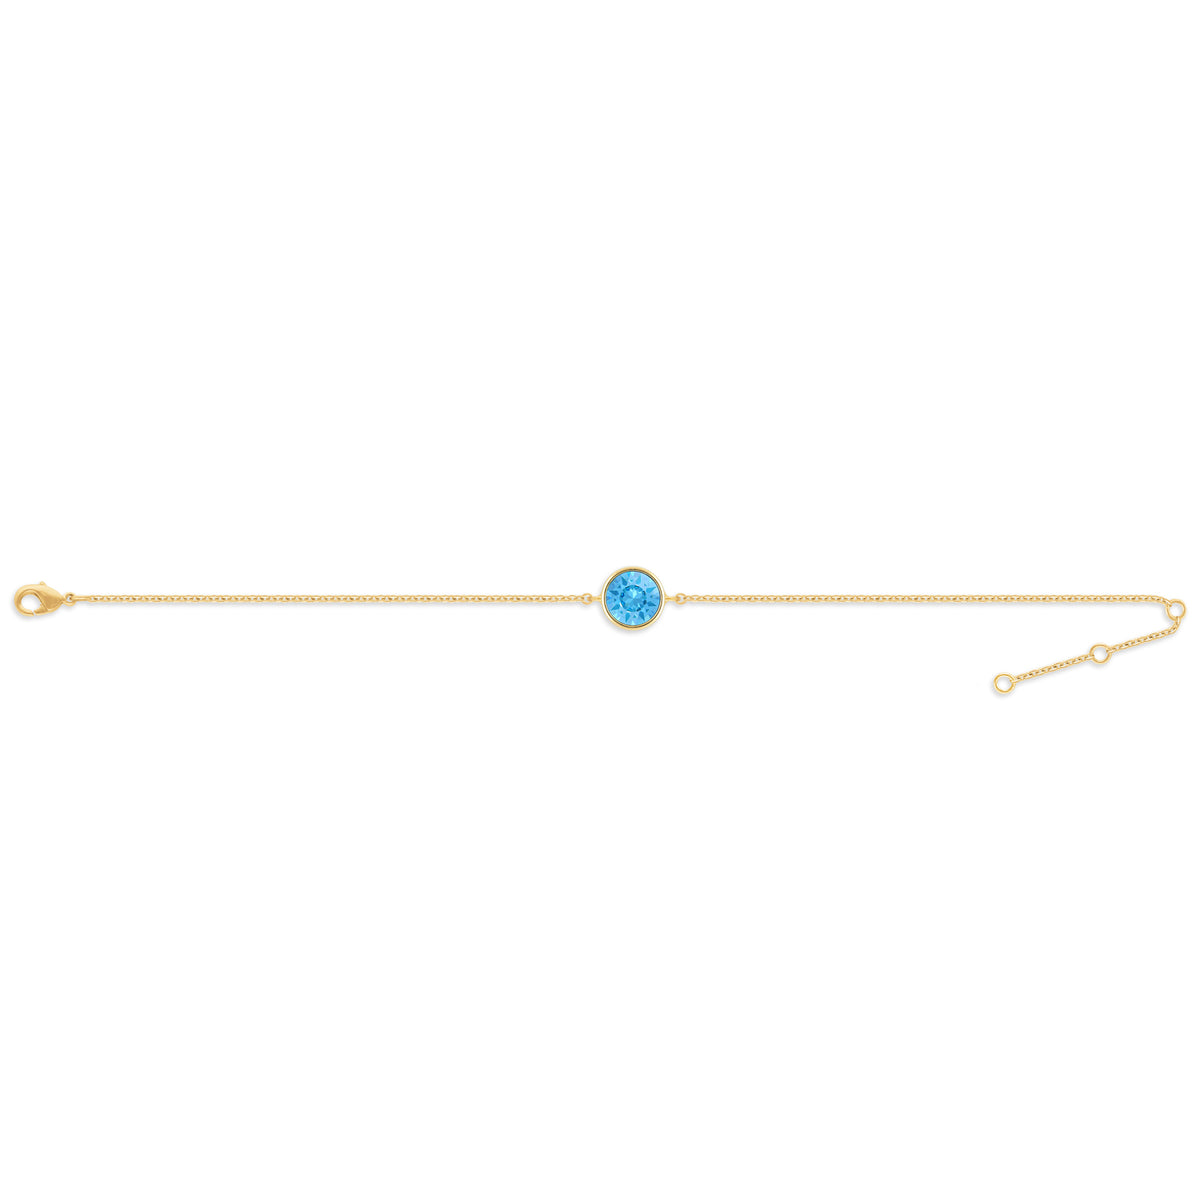 Harley Chain Bracelet with Blue Aquamarine Round Crystals from Swarovski Gold Plated - Ed Heart